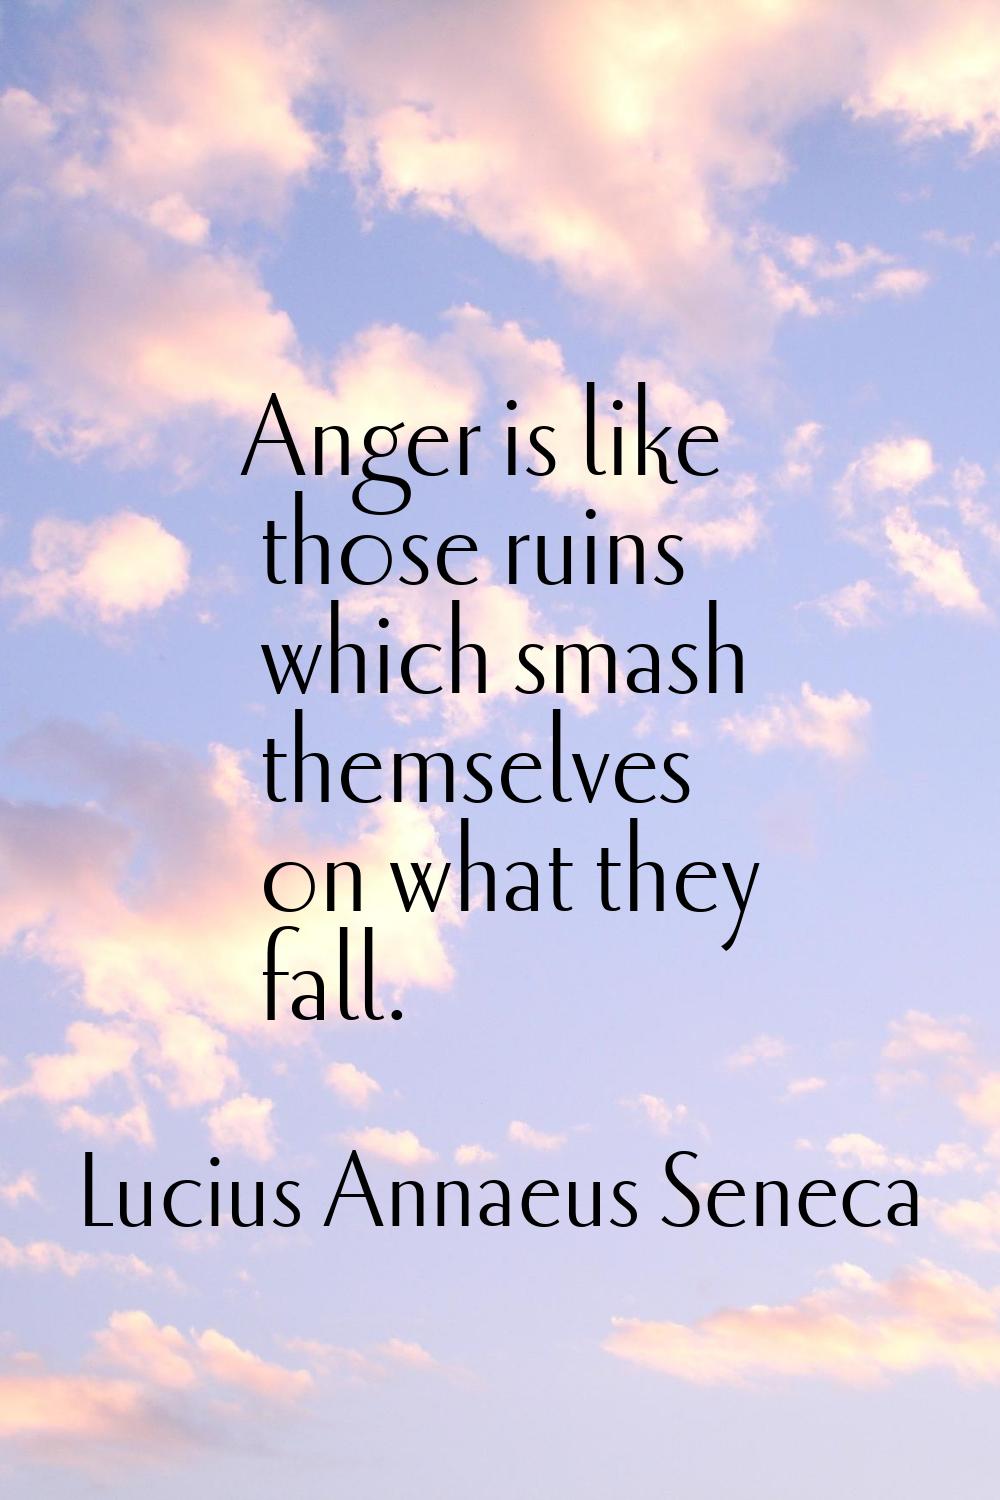 Anger is like those ruins which smash themselves on what they fall.